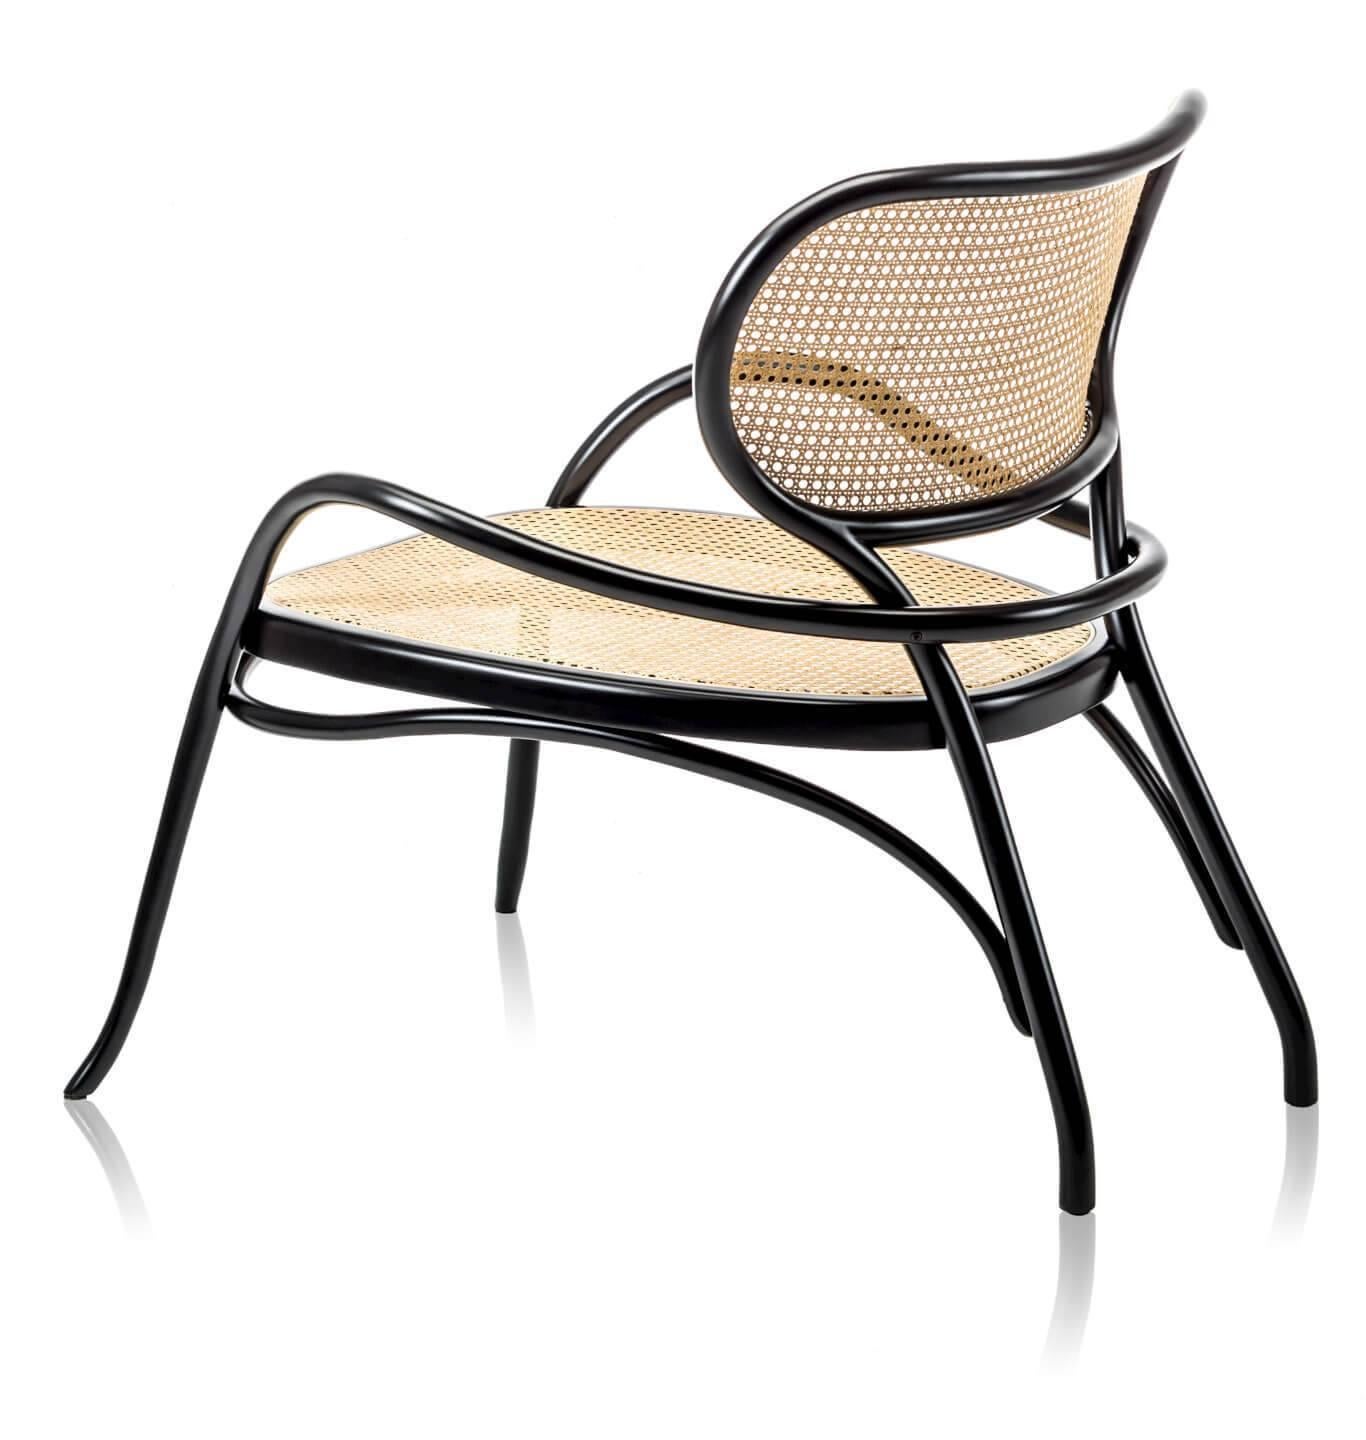 Nigel Coates has designed a sophisticated lounge chair with a complex design reflecting the stylistic features of the brand with refined skill. The seat and the comfortable backrest made of Vienna cane with a special large mesh version, are defined